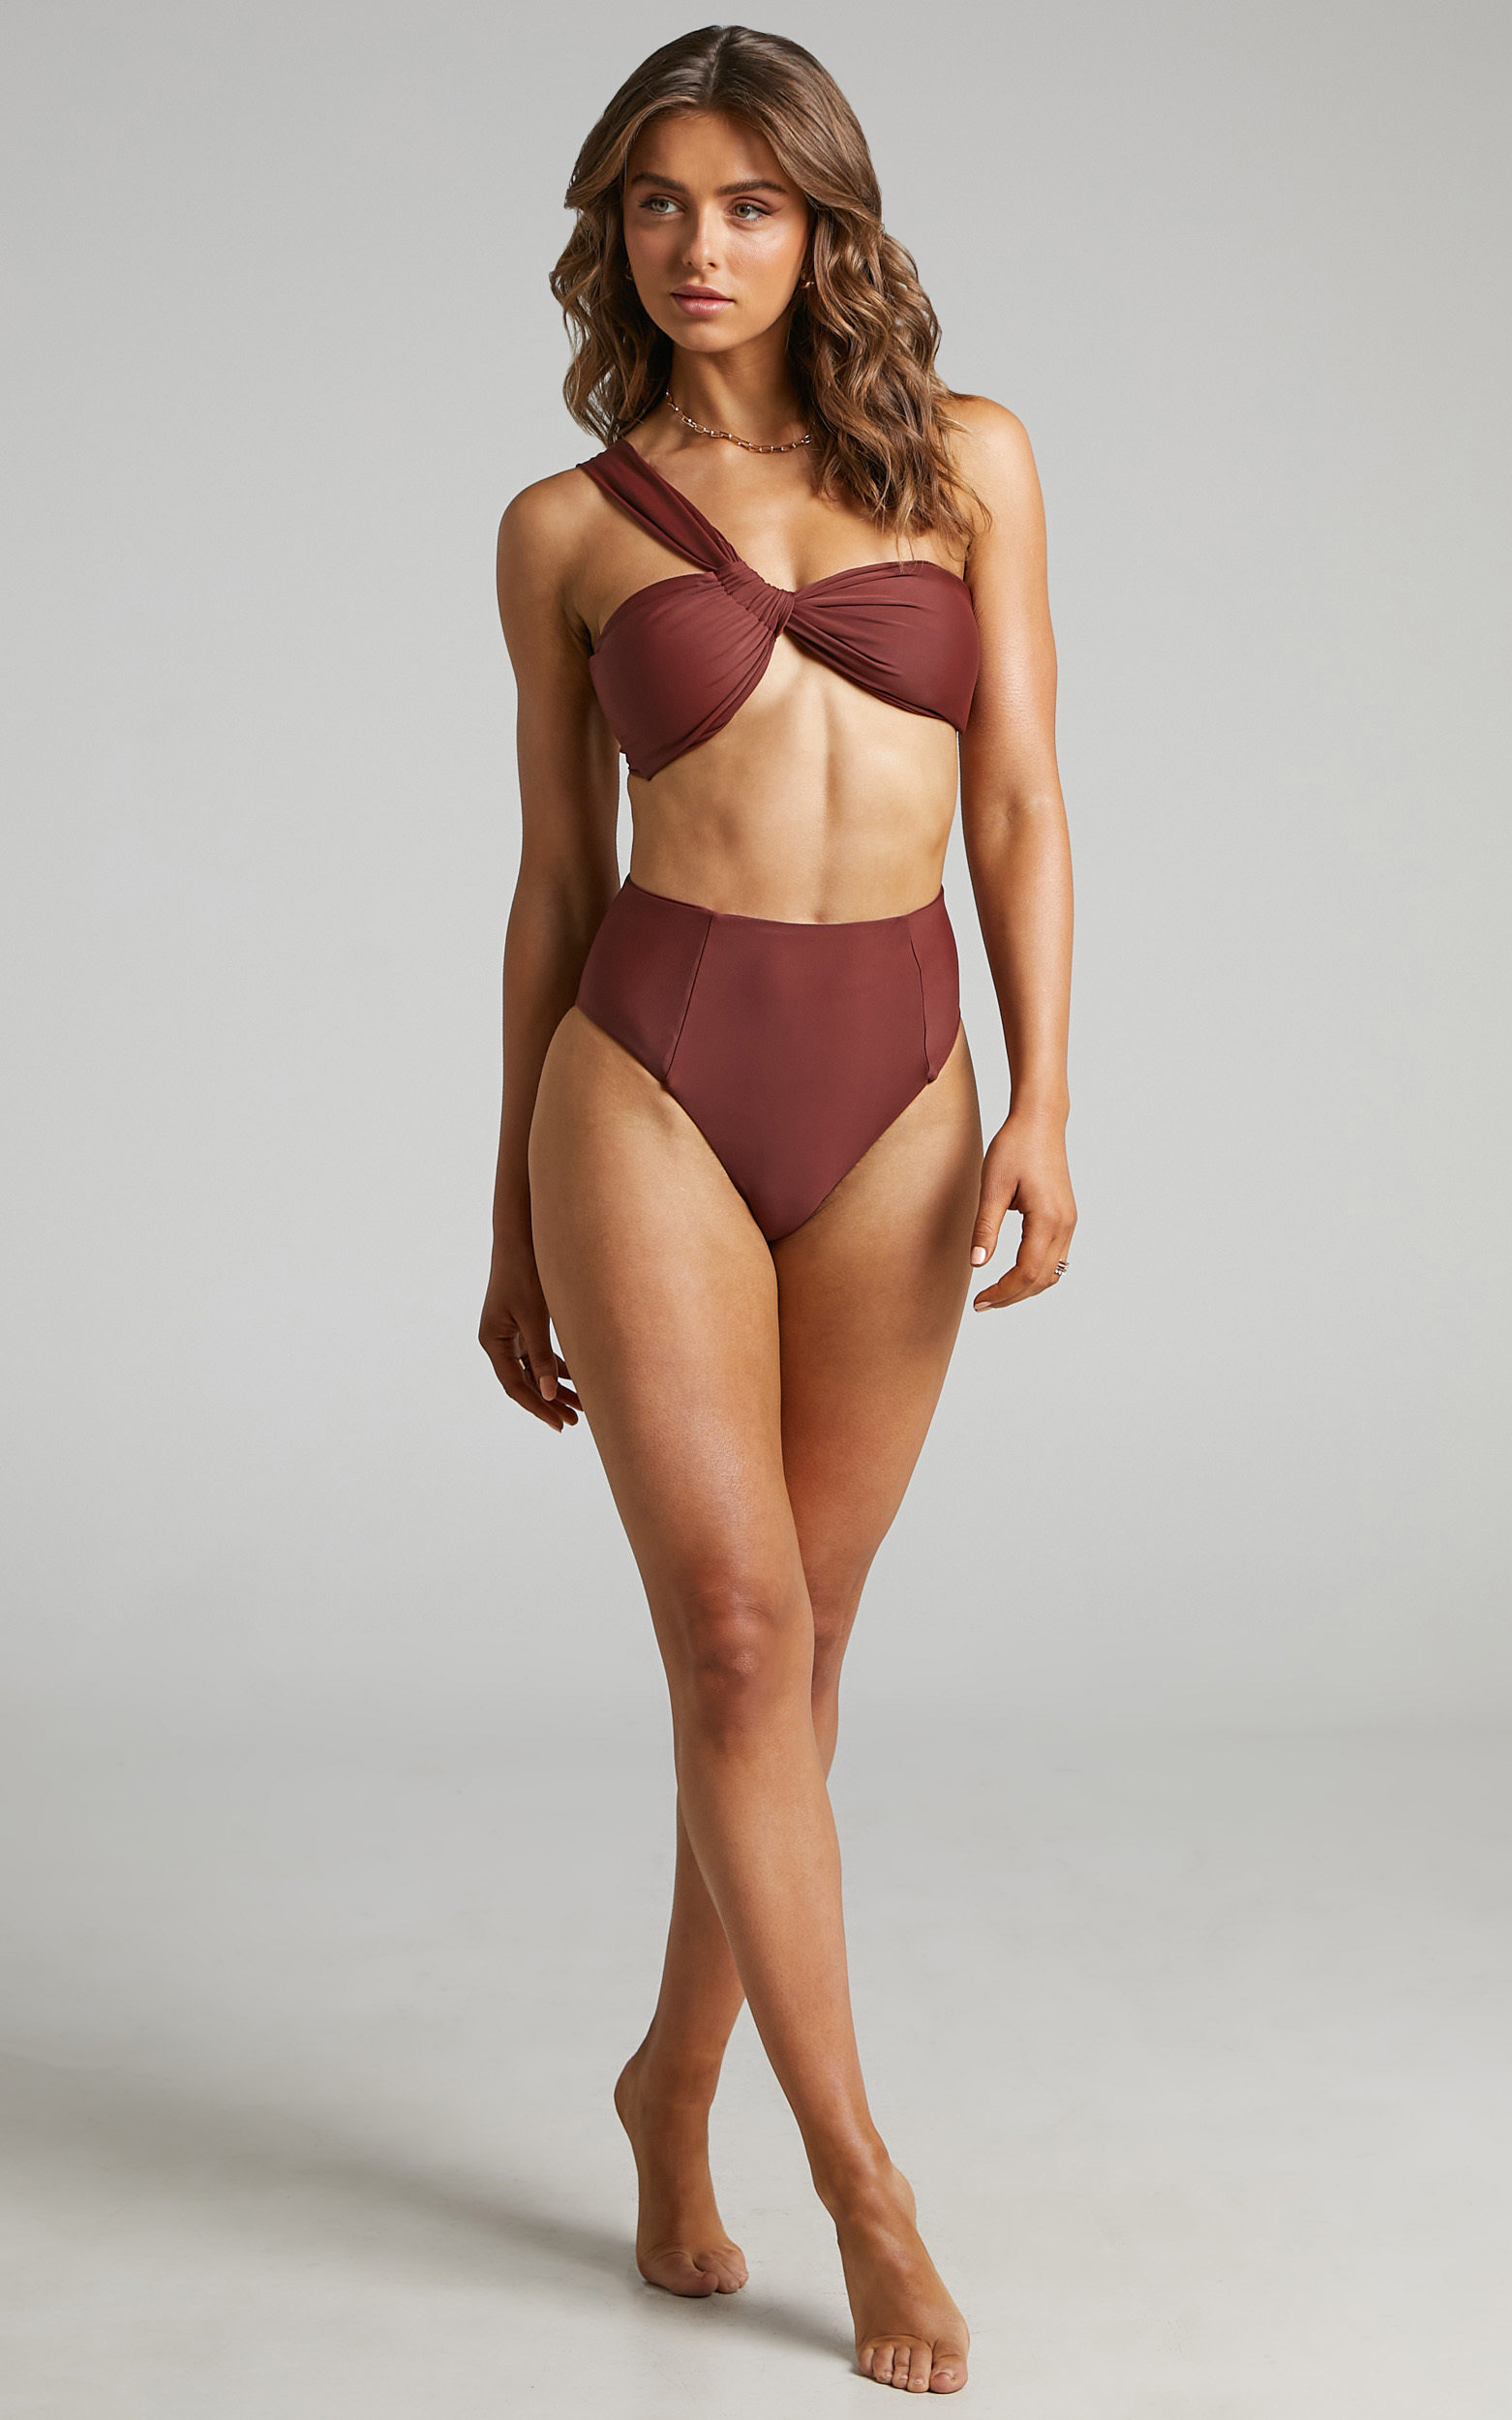 Azul Recycled Nylon Twist Front One Shoulder Bikini Top in Chocolate - 06, BRN1, hi-res image number null